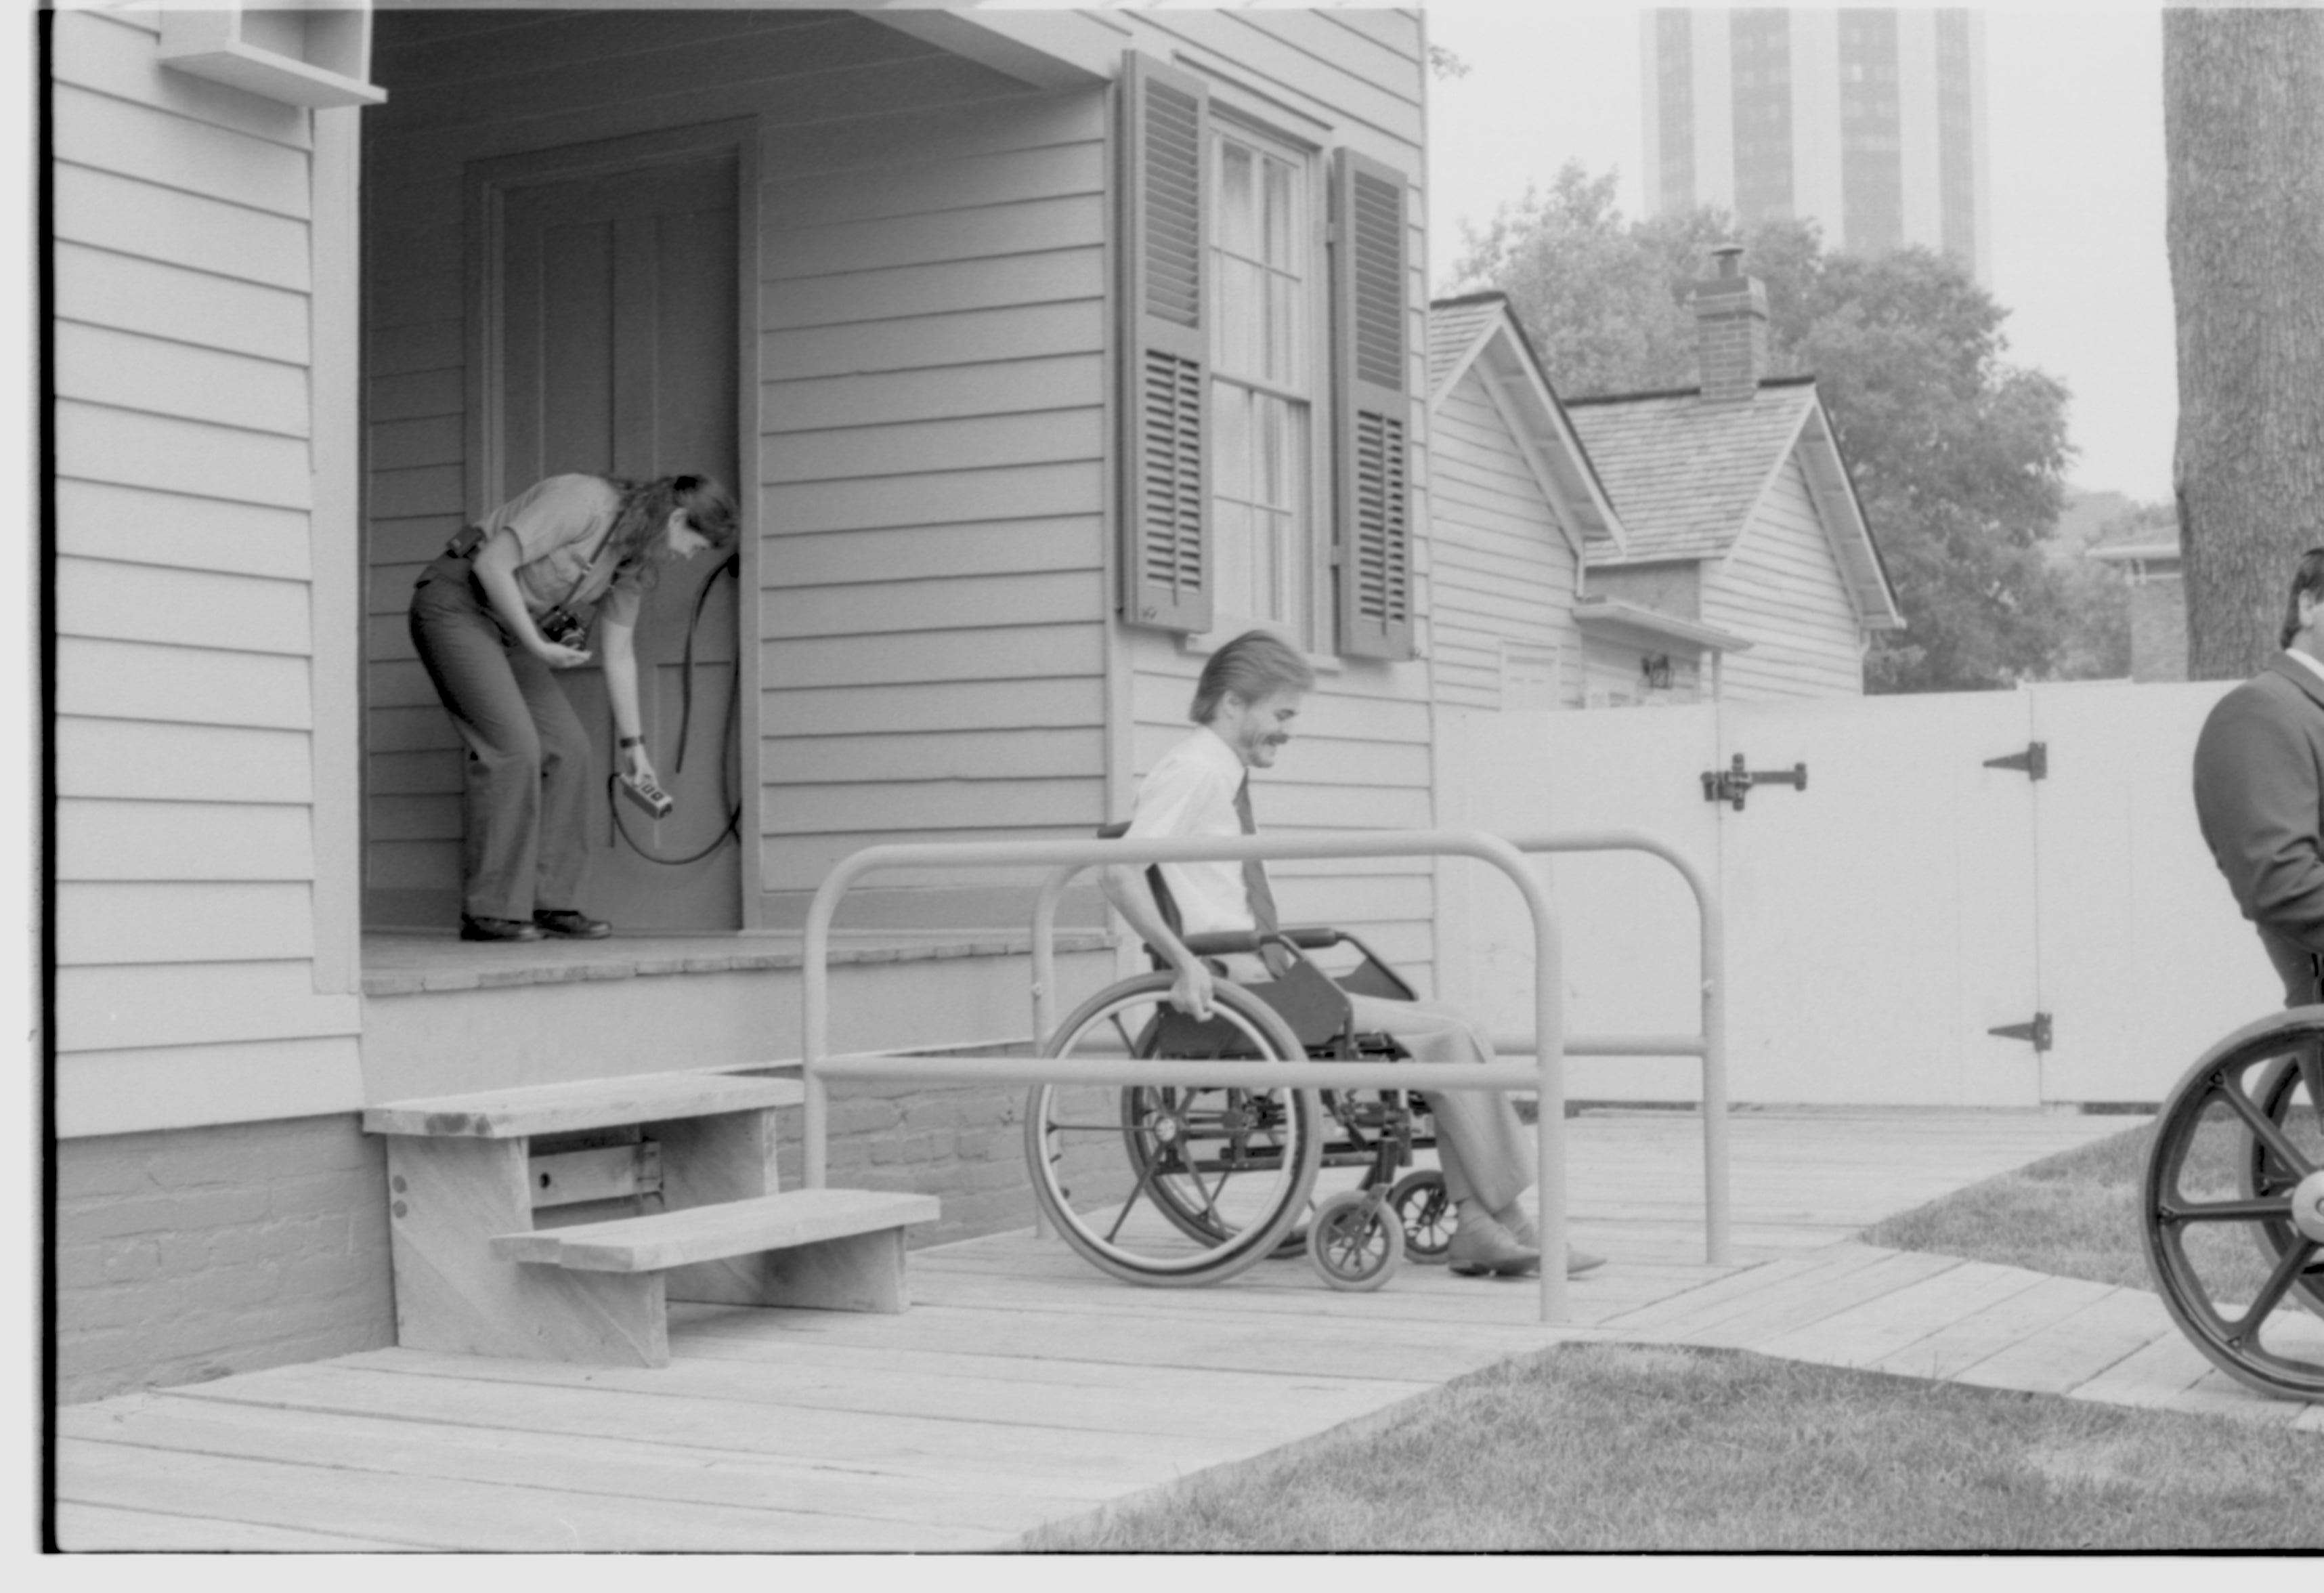 Lincoln Home wheelchair lift fully retracted. One man in wheelchair preparing to exit lift, with one other man in wheelchair to right of picture. Staff member on back porch using lift controls. Corneau house in background. Photographer facing north west.